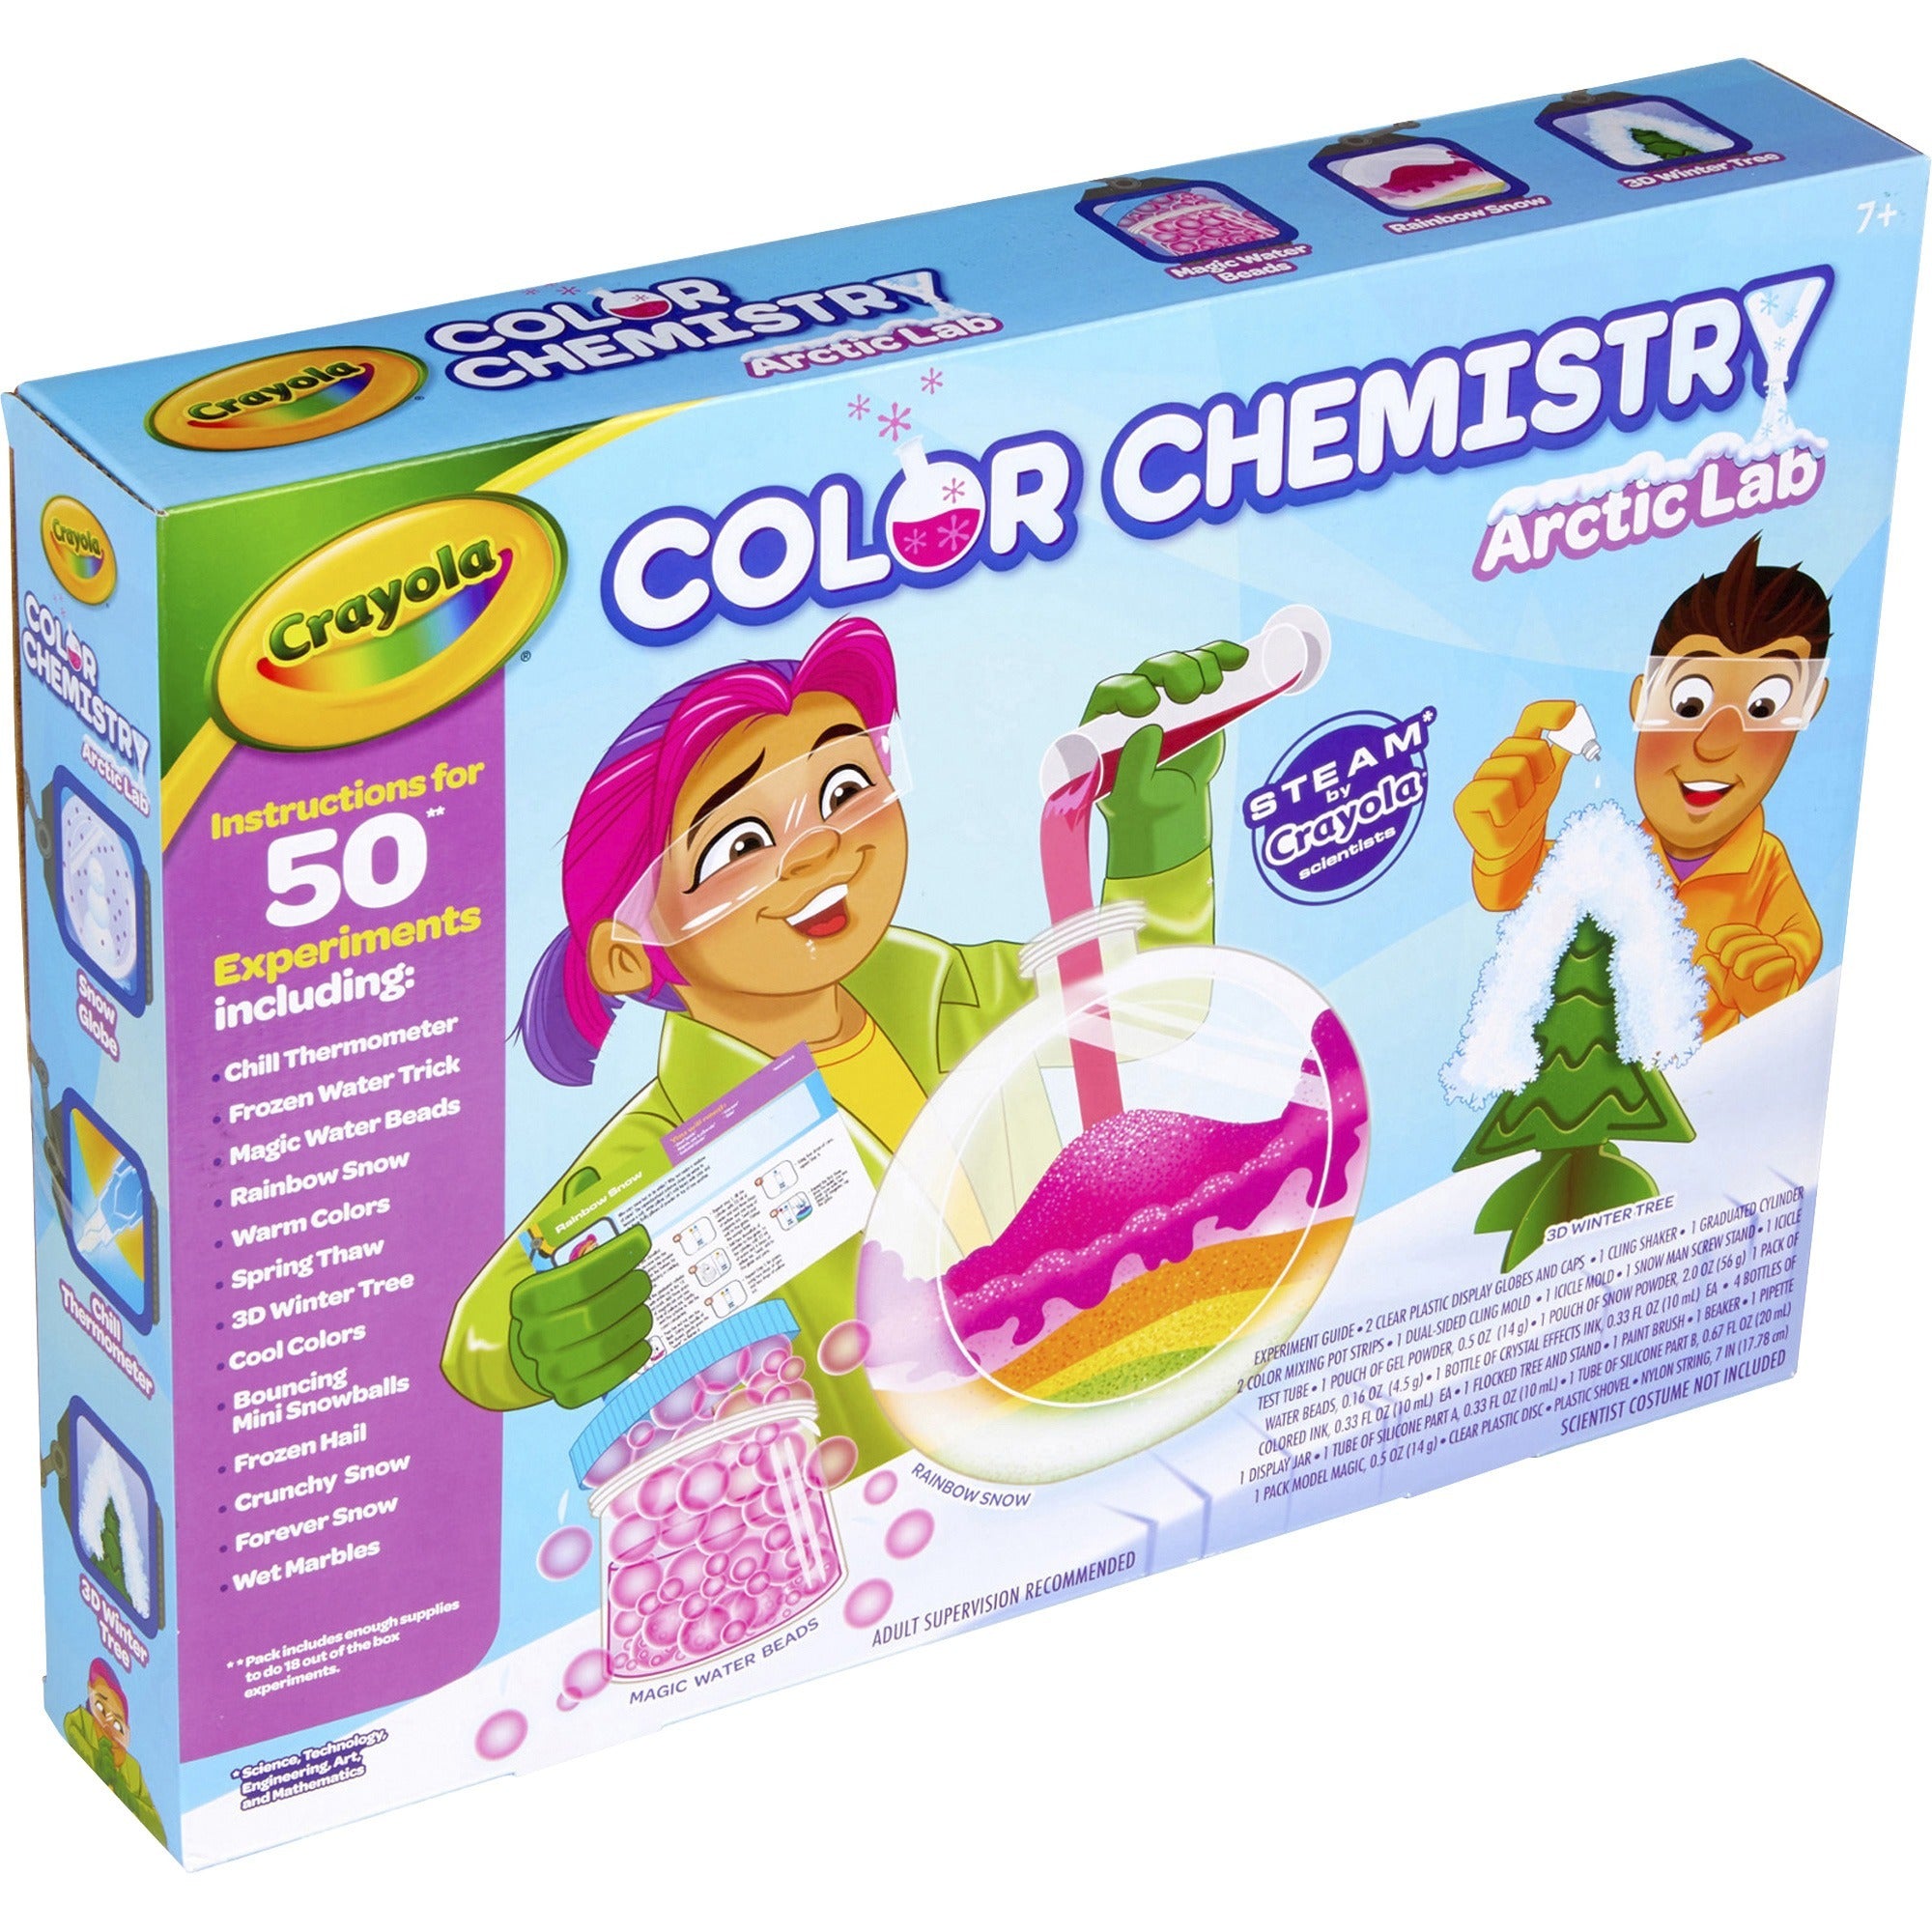 crayola-color-chemistry-arctic-lab-set-skill-learning-science-chemistry-7-year-&-up-multi_cyo747296 - 2